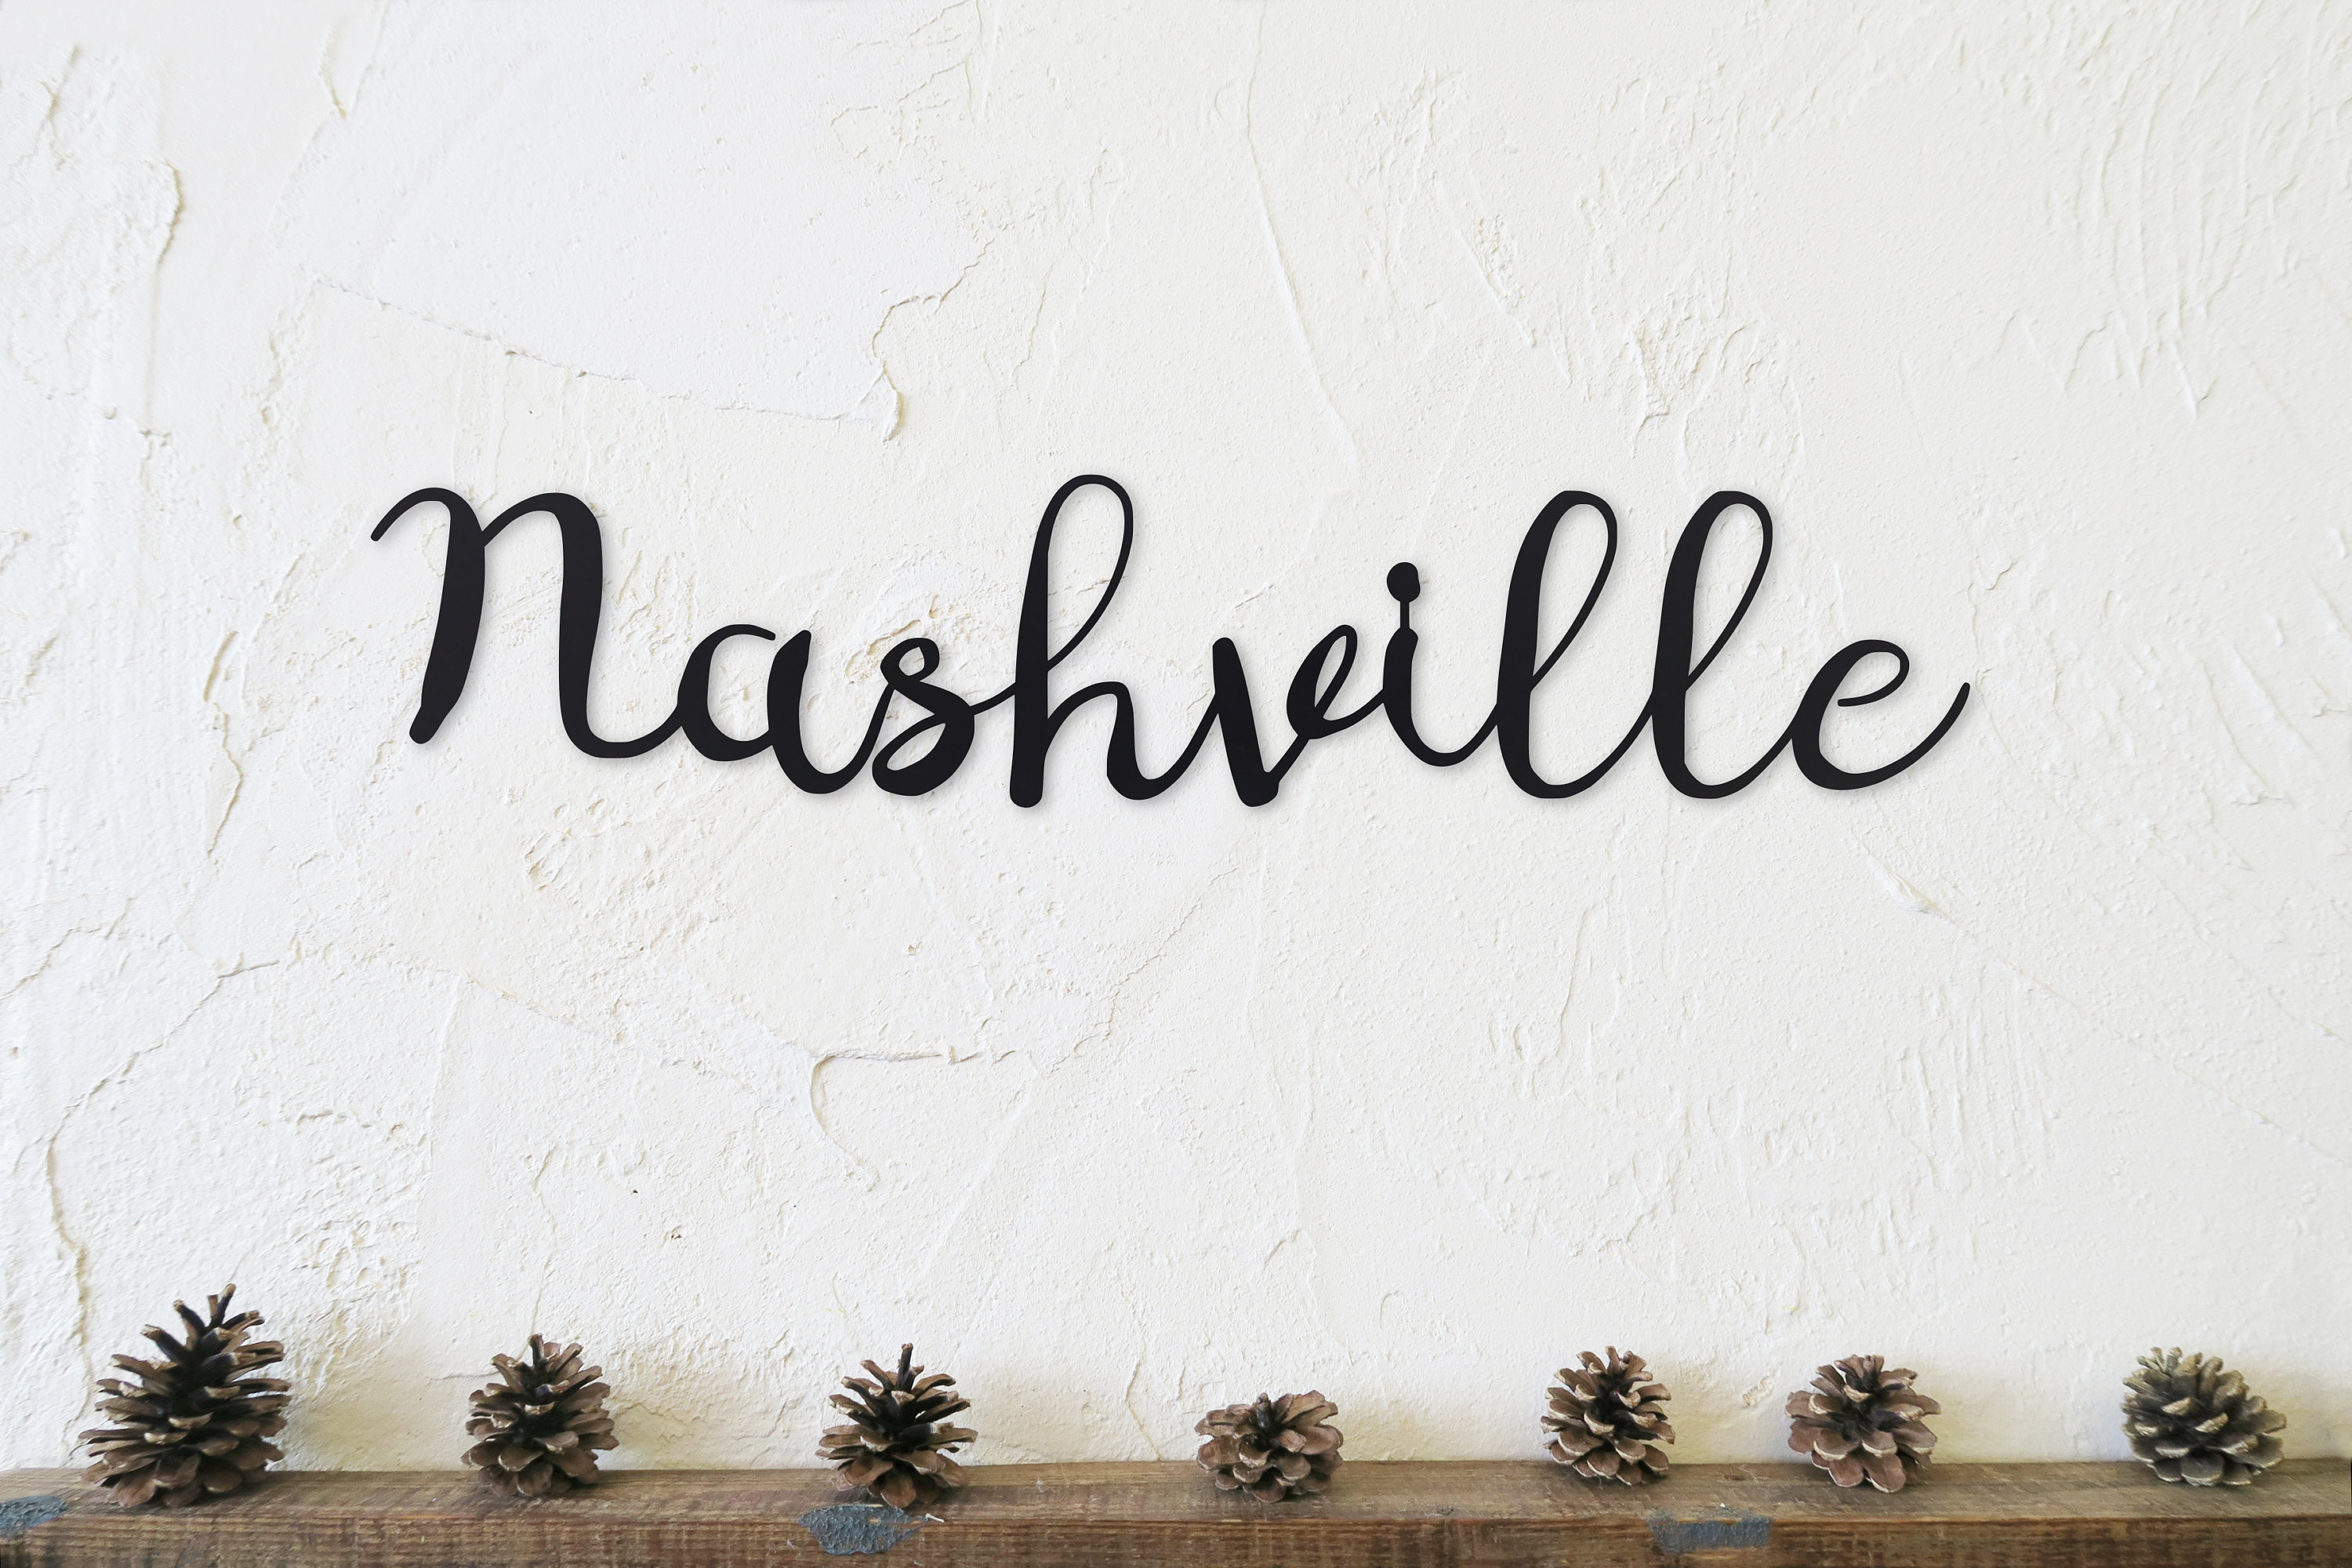 NASHVILLE Personalized Chic Metal Sign Home Decor Cities 4x18 104180007235